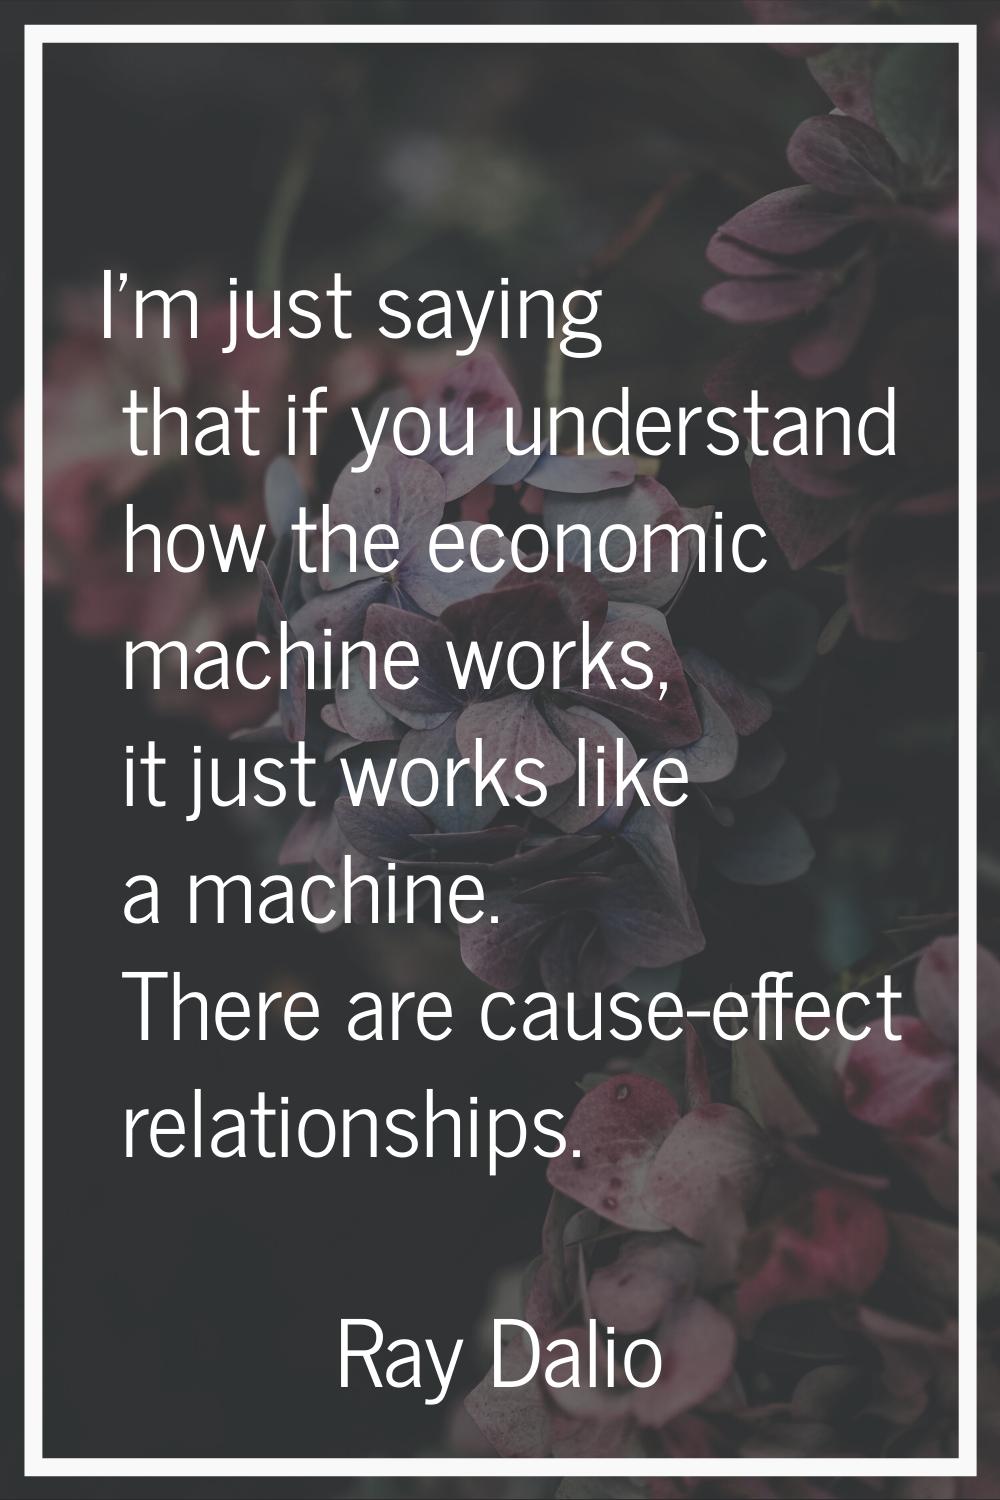 I'm just saying that if you understand how the economic machine works, it just works like a machine